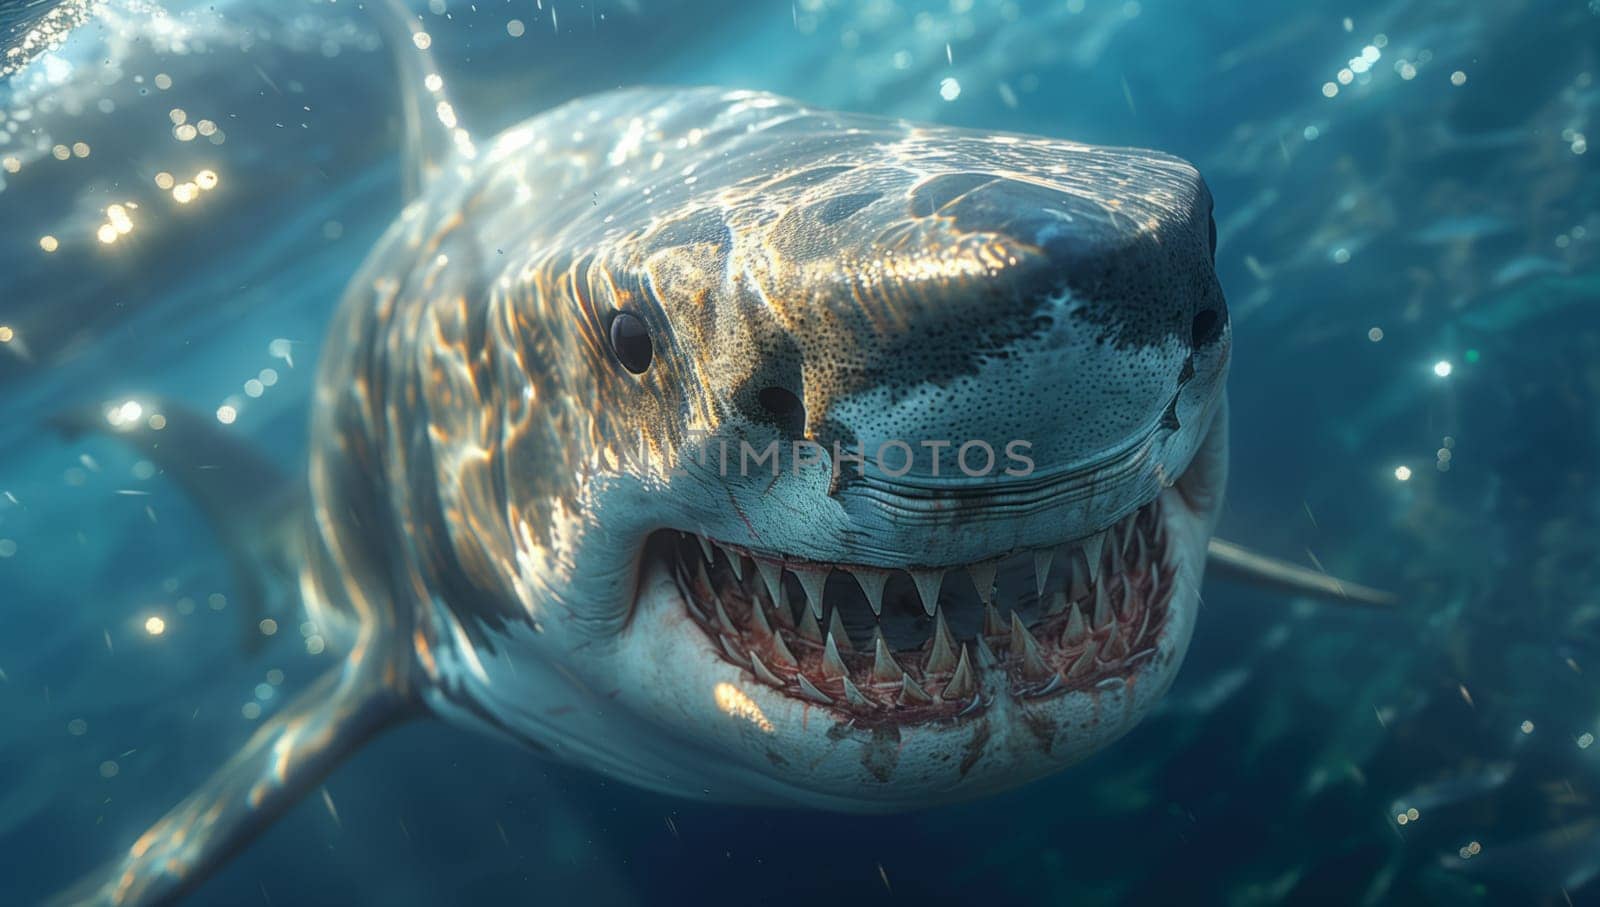 A Great White Shark with its jaw open swims in the ocean by richwolf